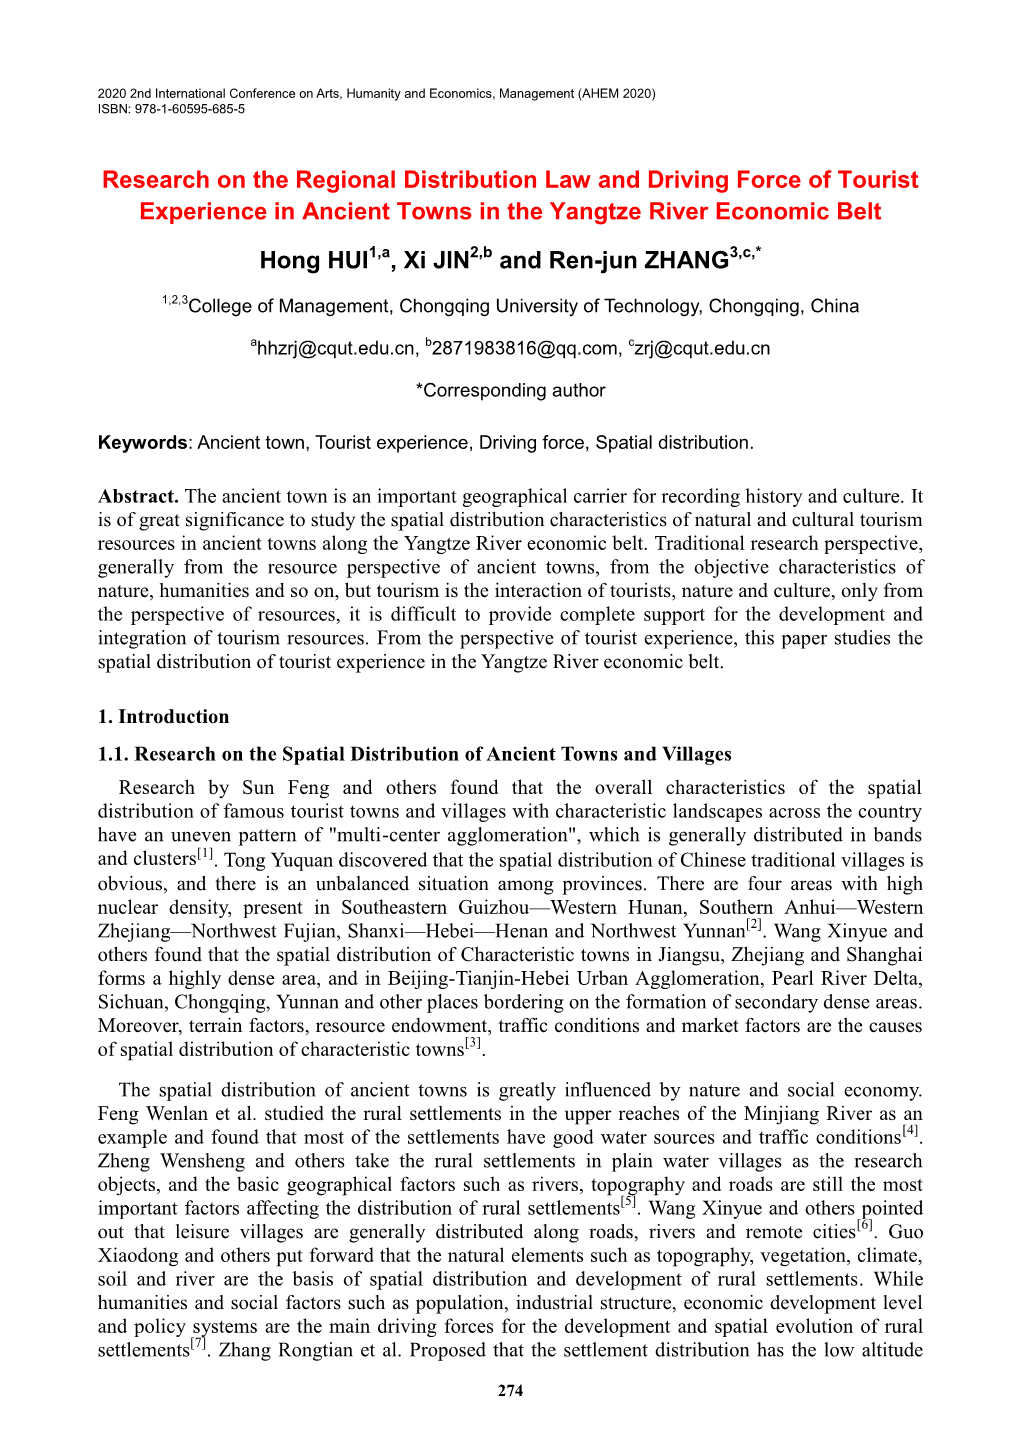 Research on the Regional Distribution Law and Driving Force of Tourist Experience in Ancient Towns in the Yangtze River Economic Belt